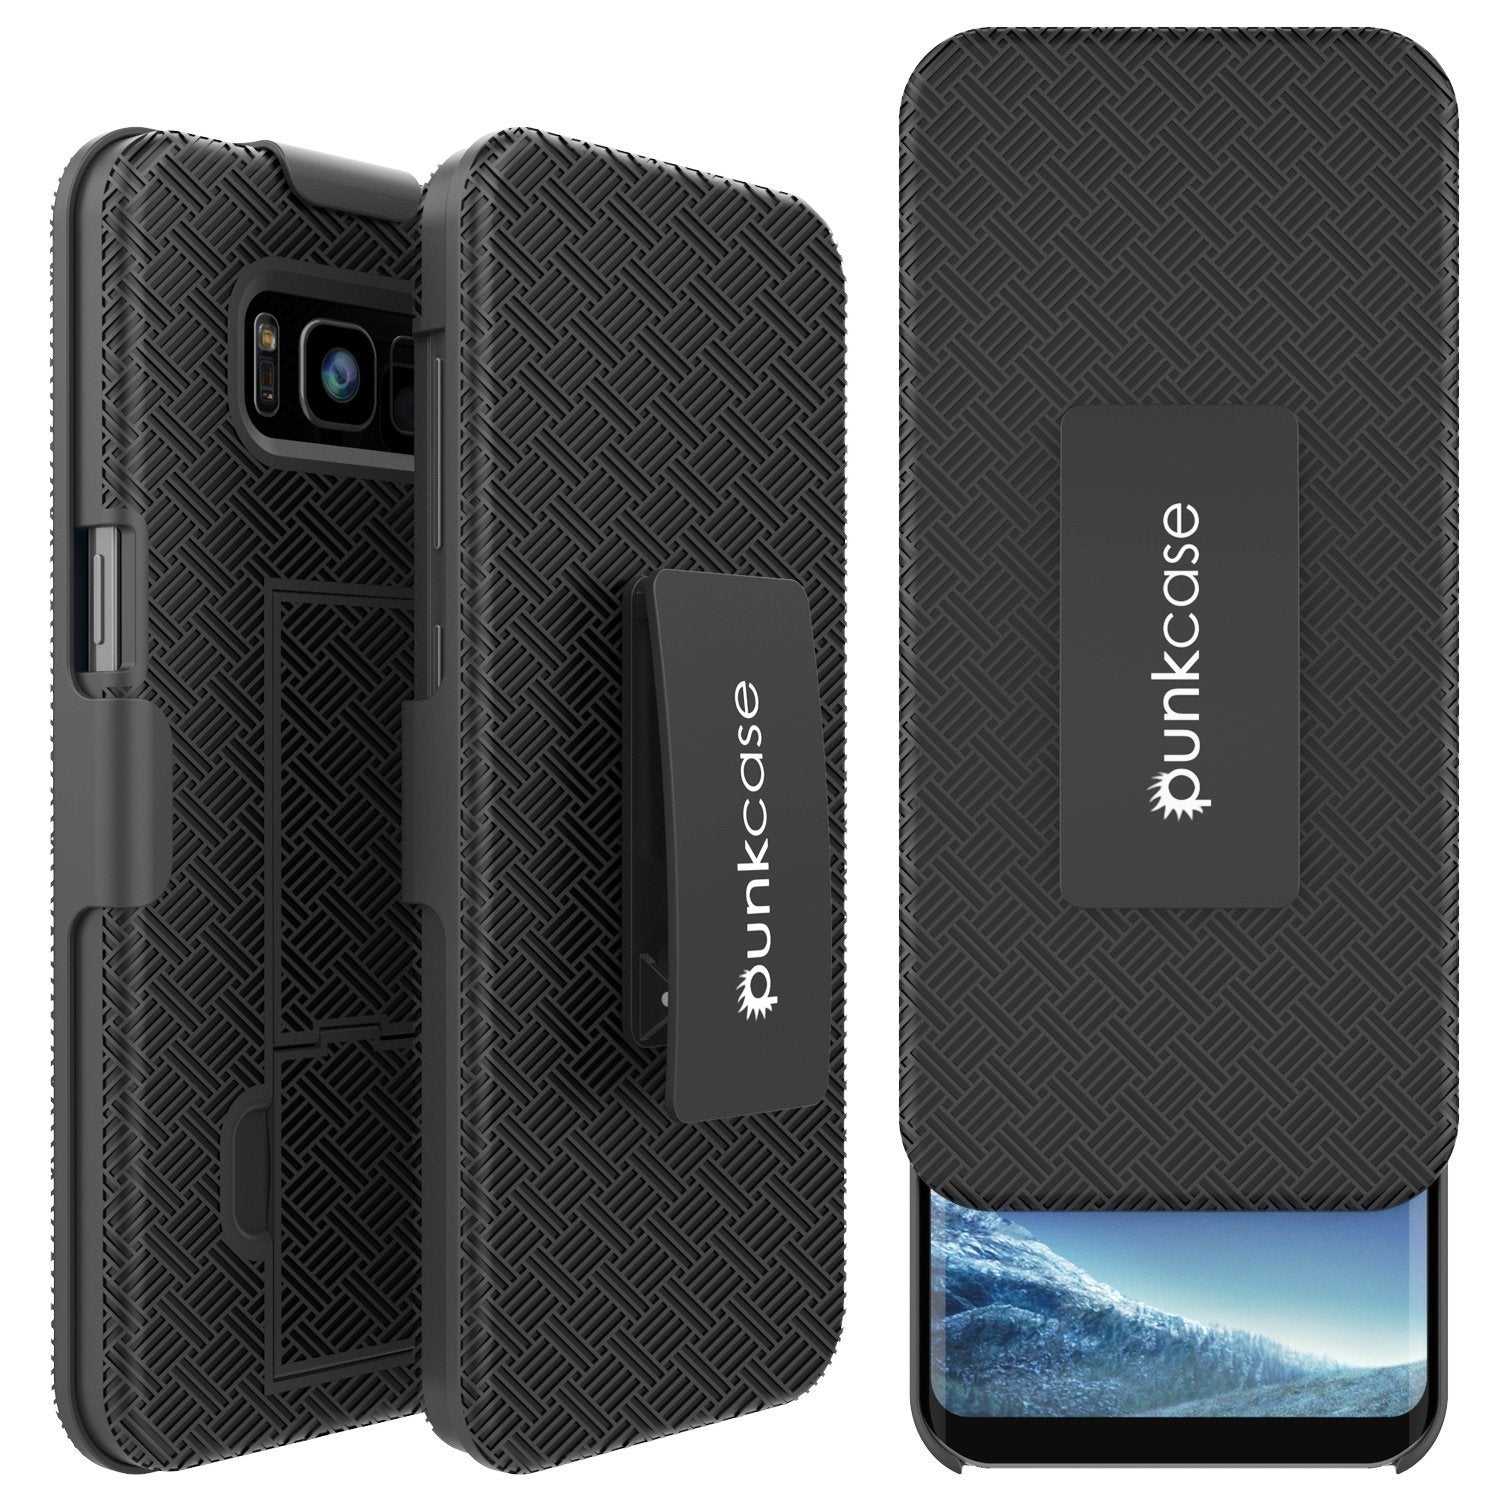 Punkcase Galaxy S8+ Plus Case, With PunkShield Glass Screen Protector, Holster Belt Clip & Built-In Kickstand Non-Slip Dual Layer Hybrid TPU Full Body Protection for Samsung S8 Plus Edge [Black] - PunkCase NZ